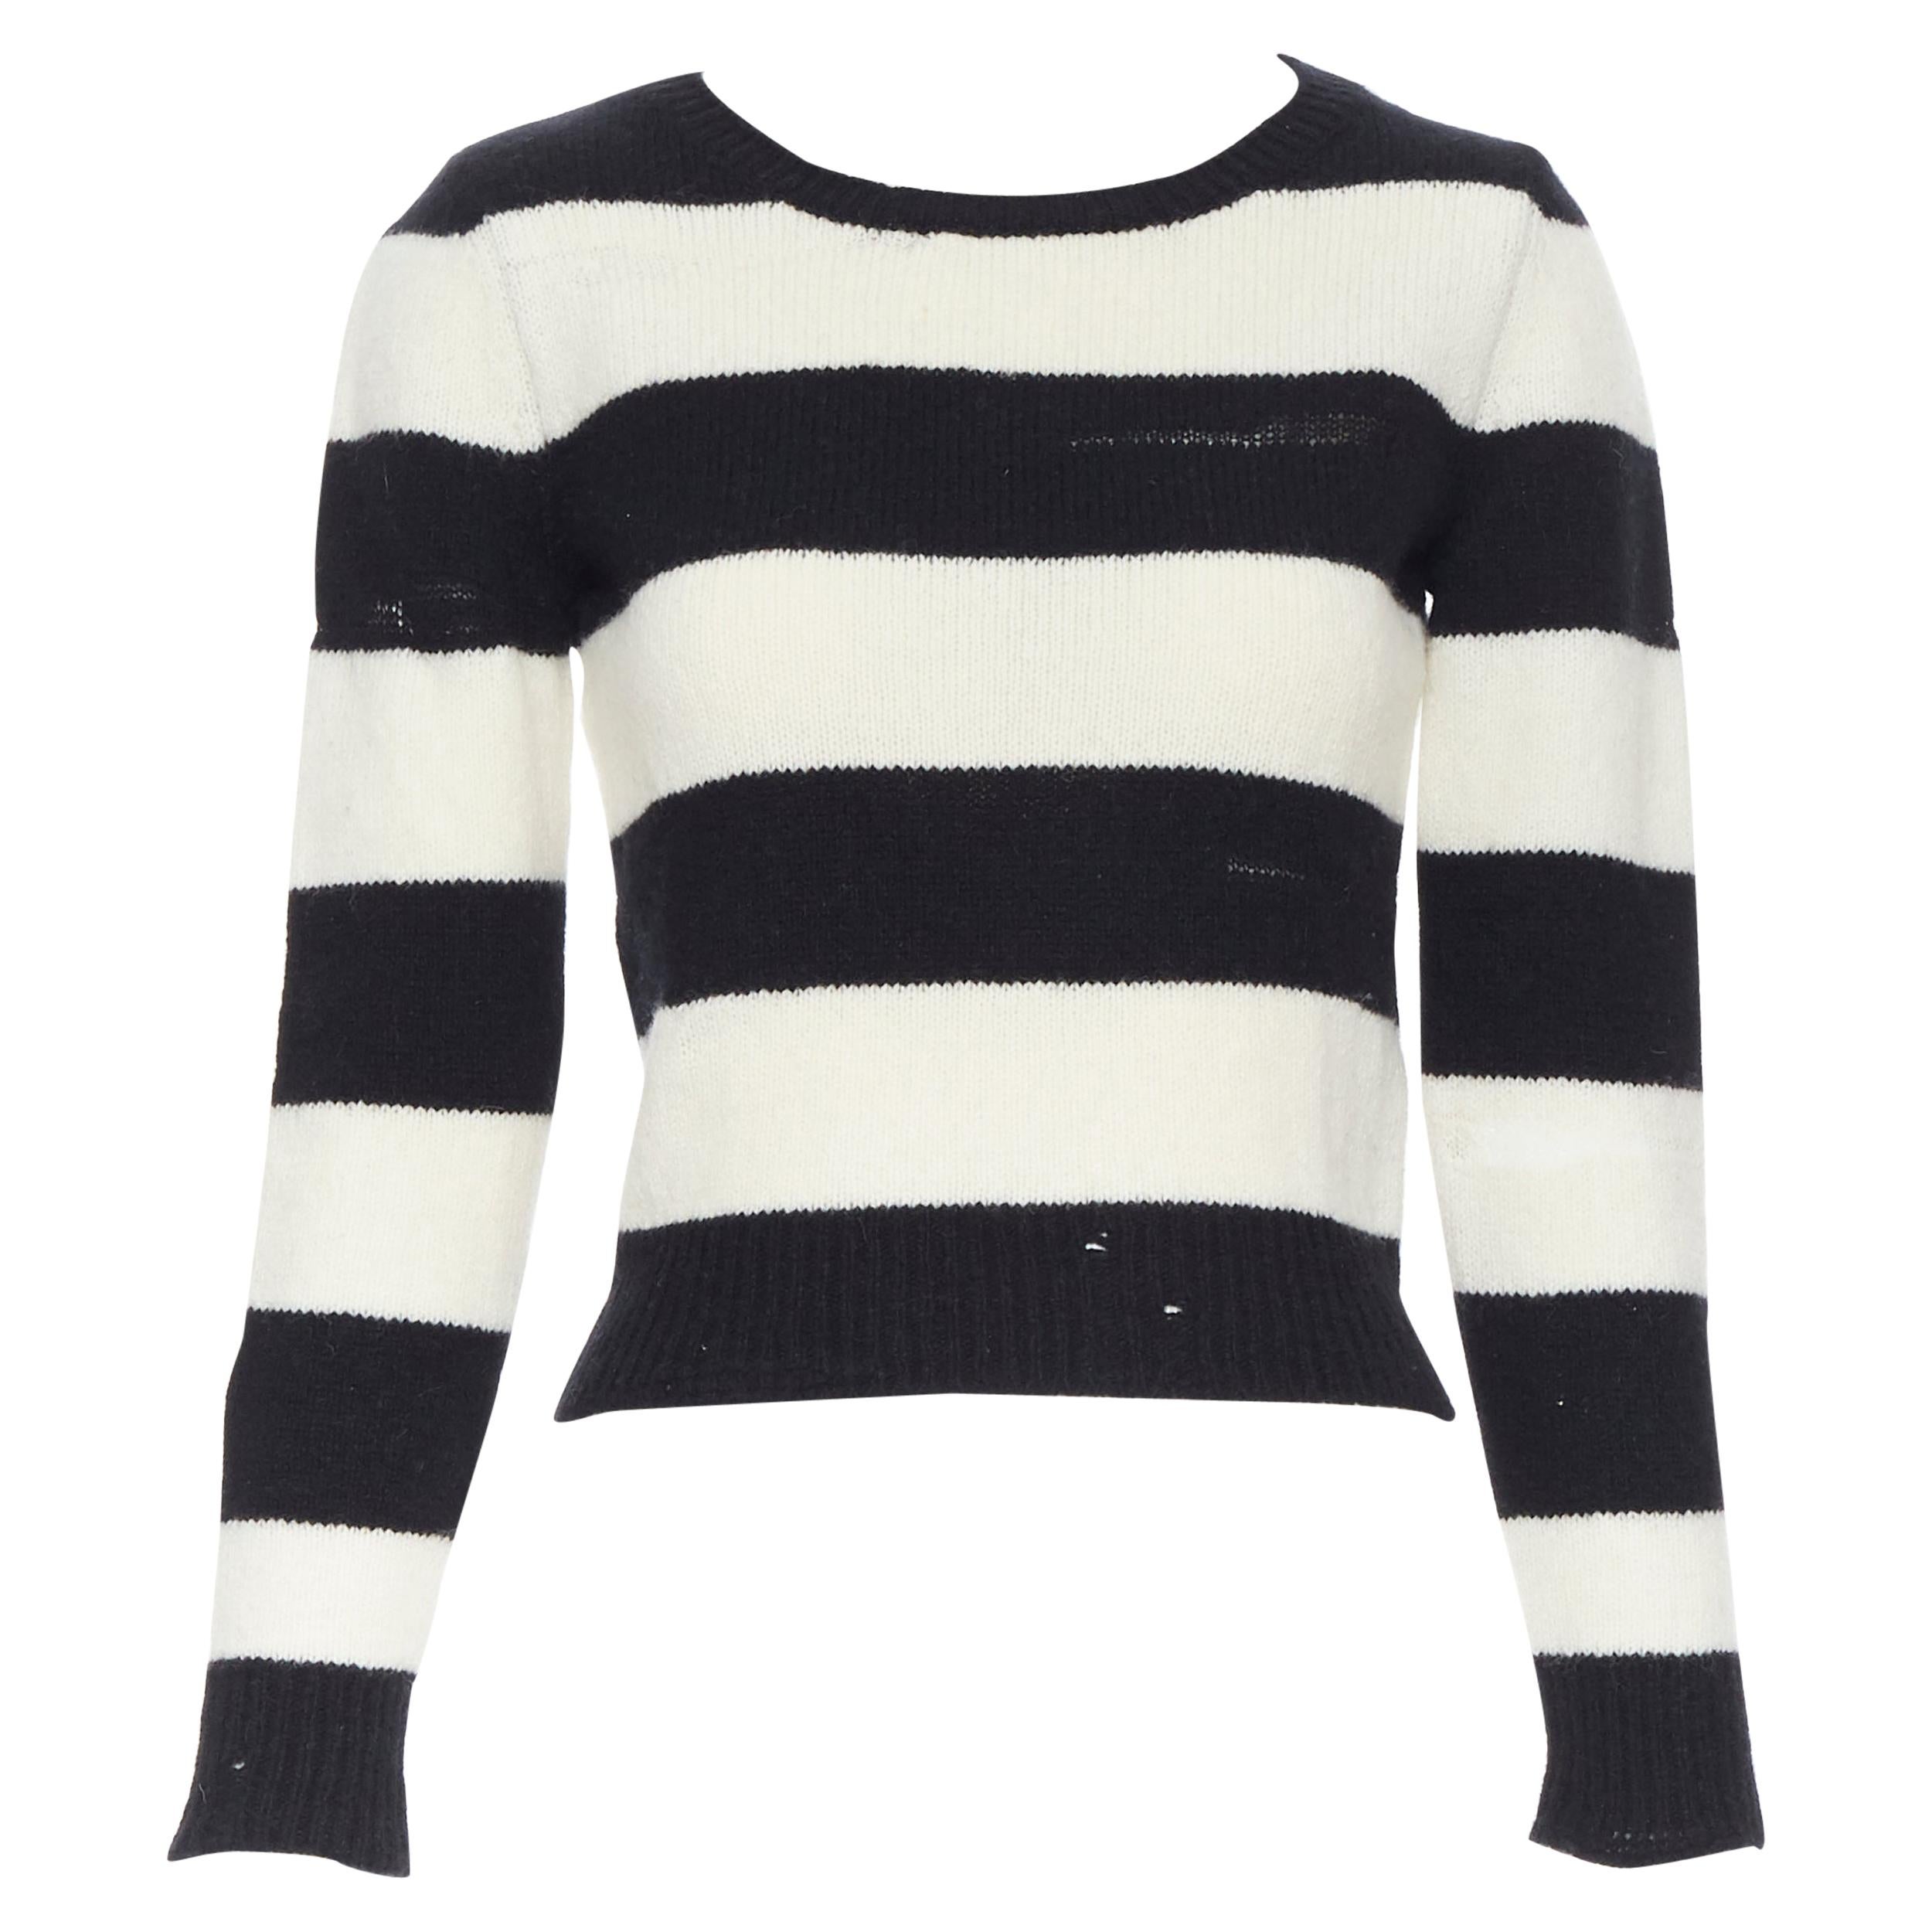 SAINT LAURENT 2015 black white striped distressed holey knit sweater top XS